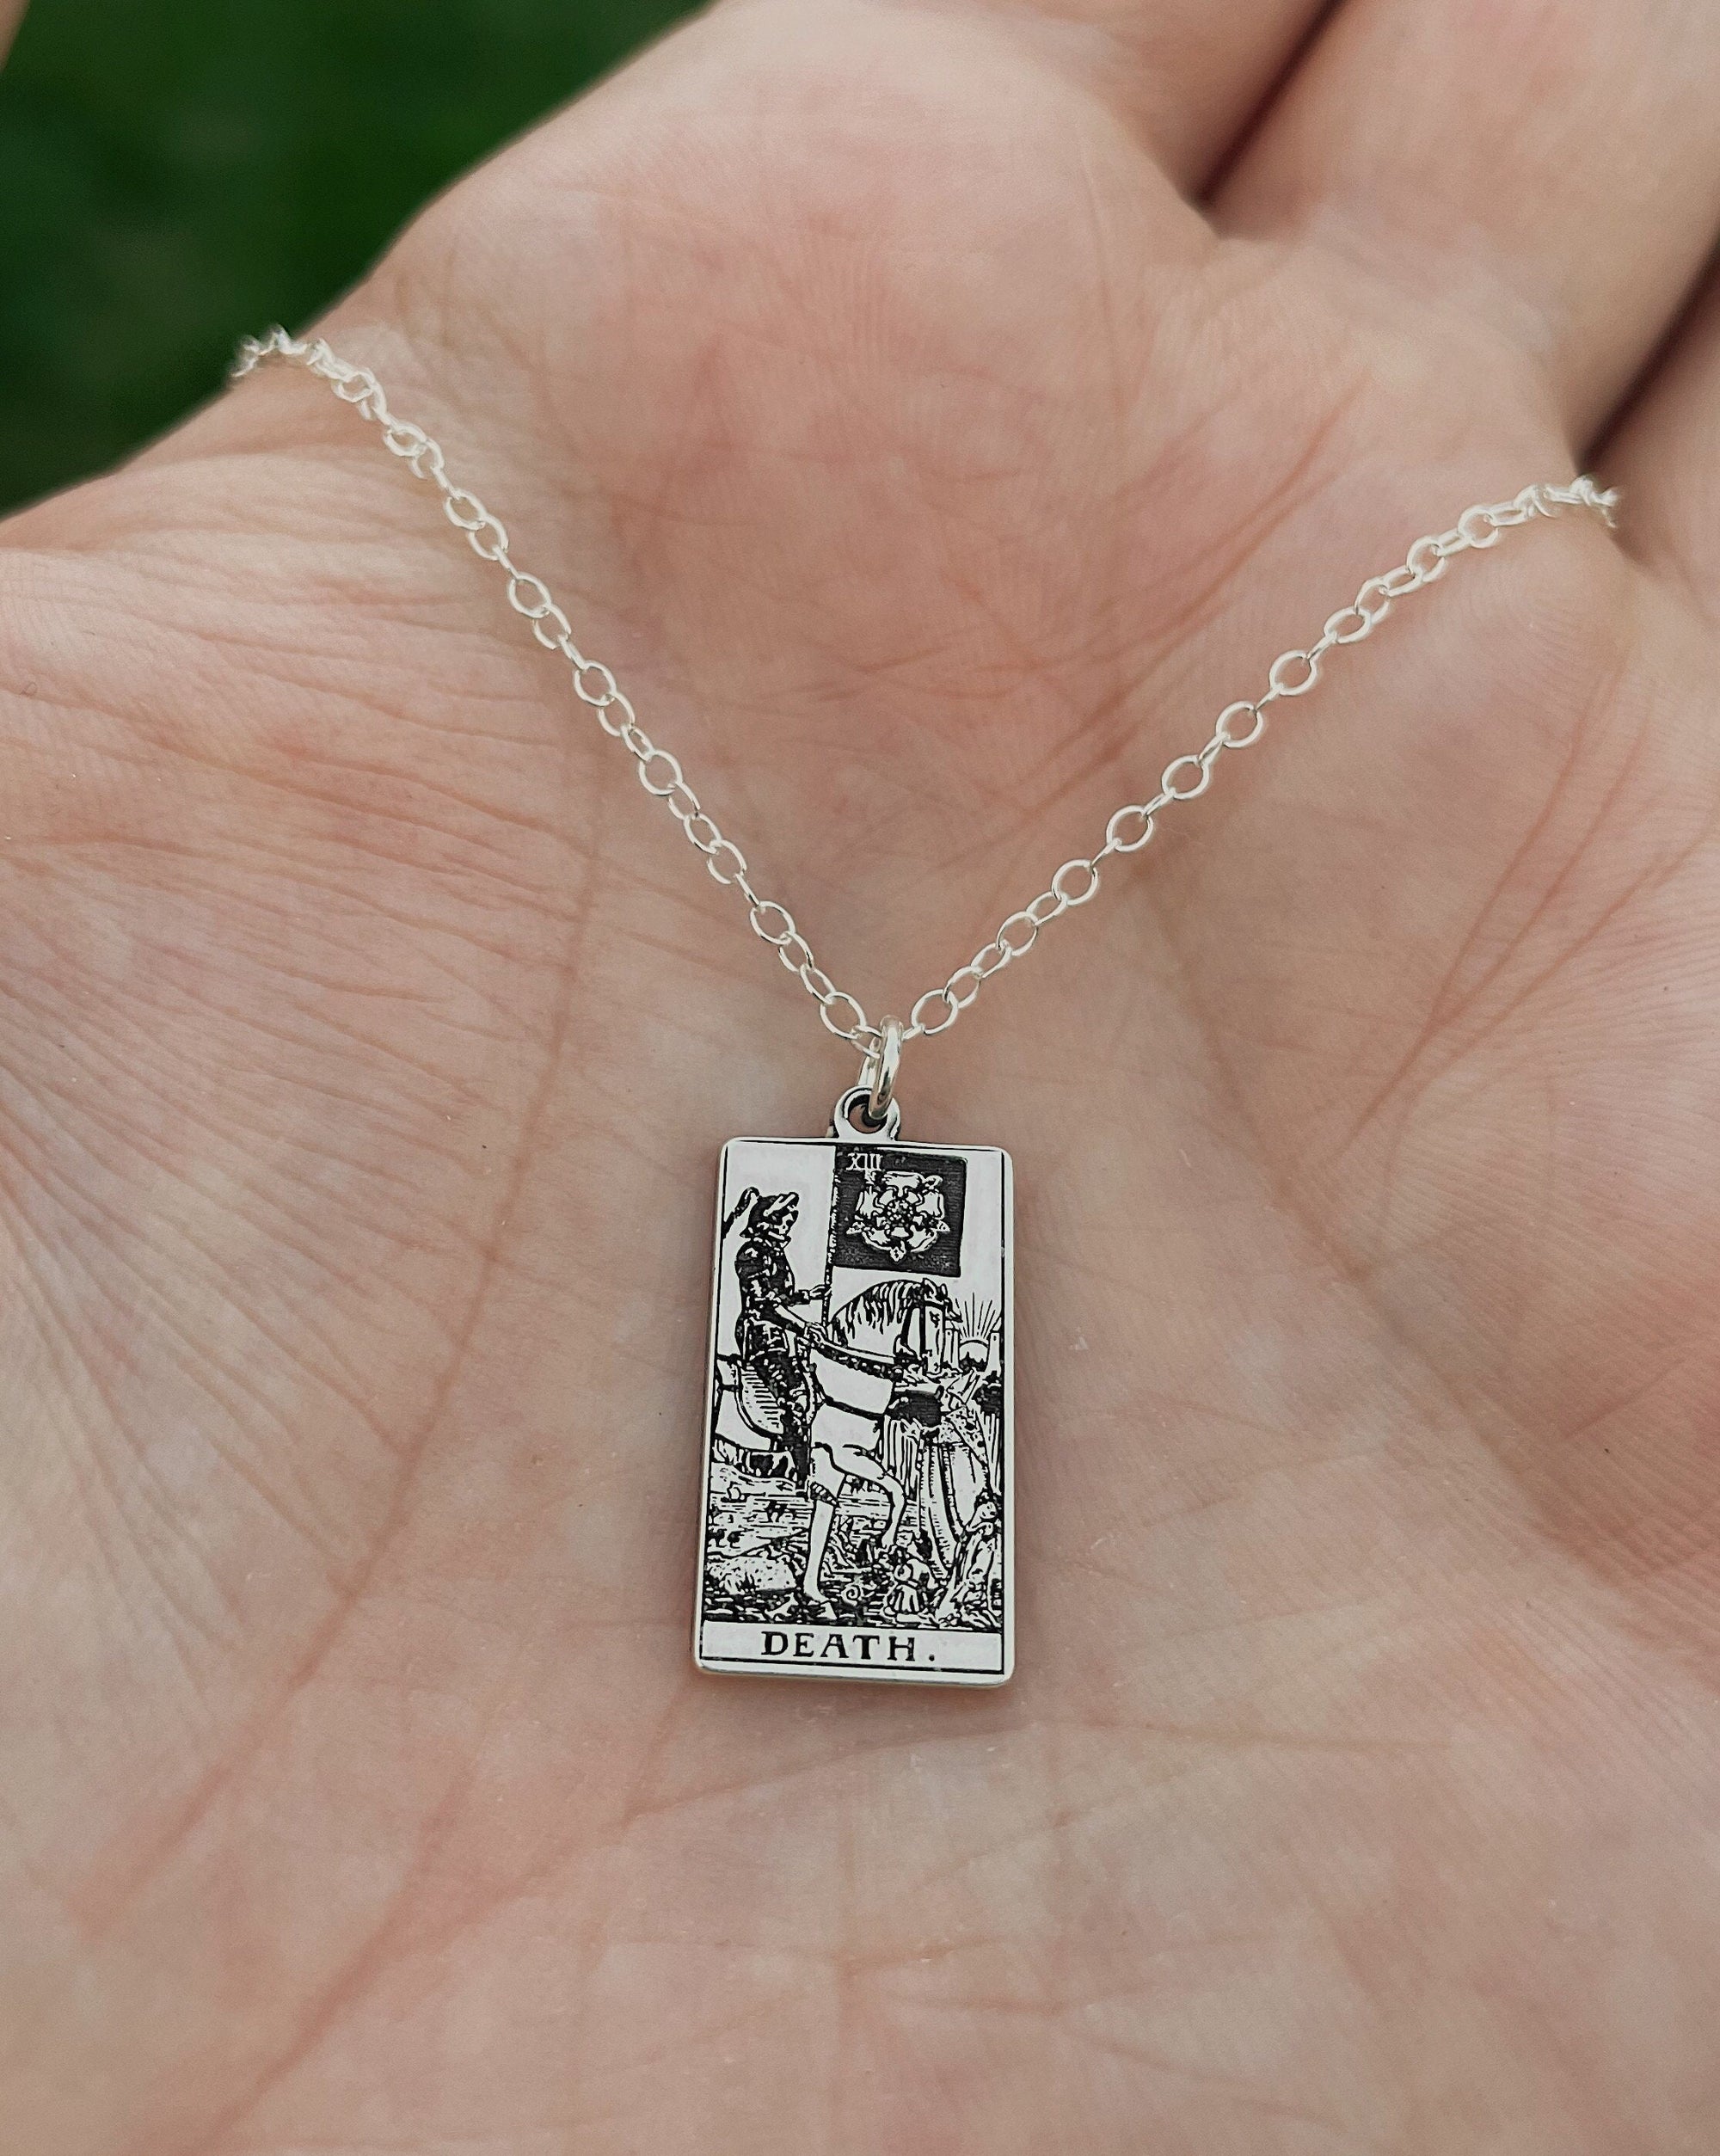 Death Tarot Card Necklace - Sterling Silver